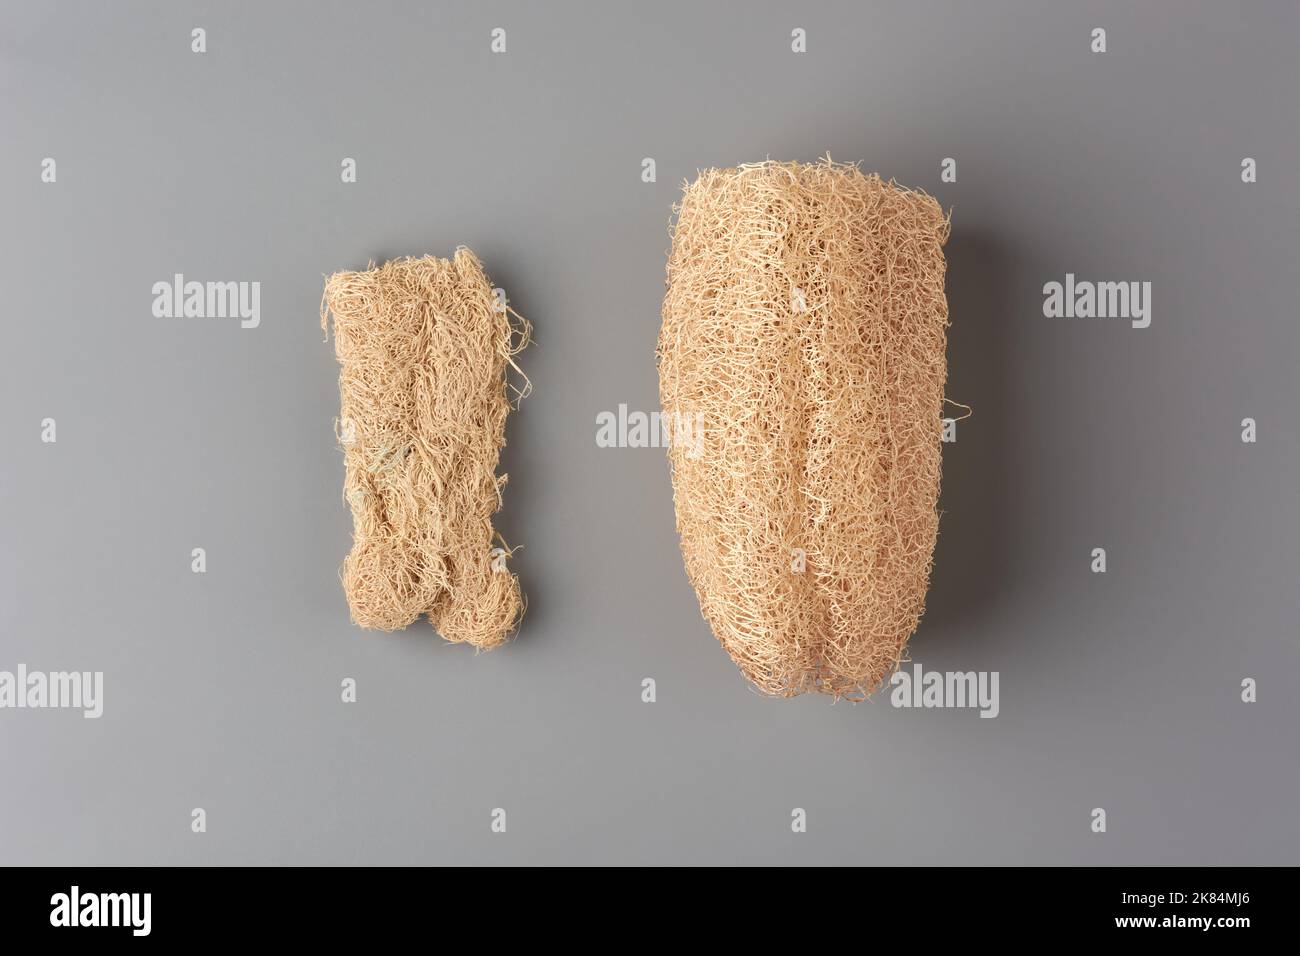 close-up of used and fresh luffa or sponge gourd, also known as vegetable sponge or rag gourd, natural scrubber product on neutral gray background Stock Photo